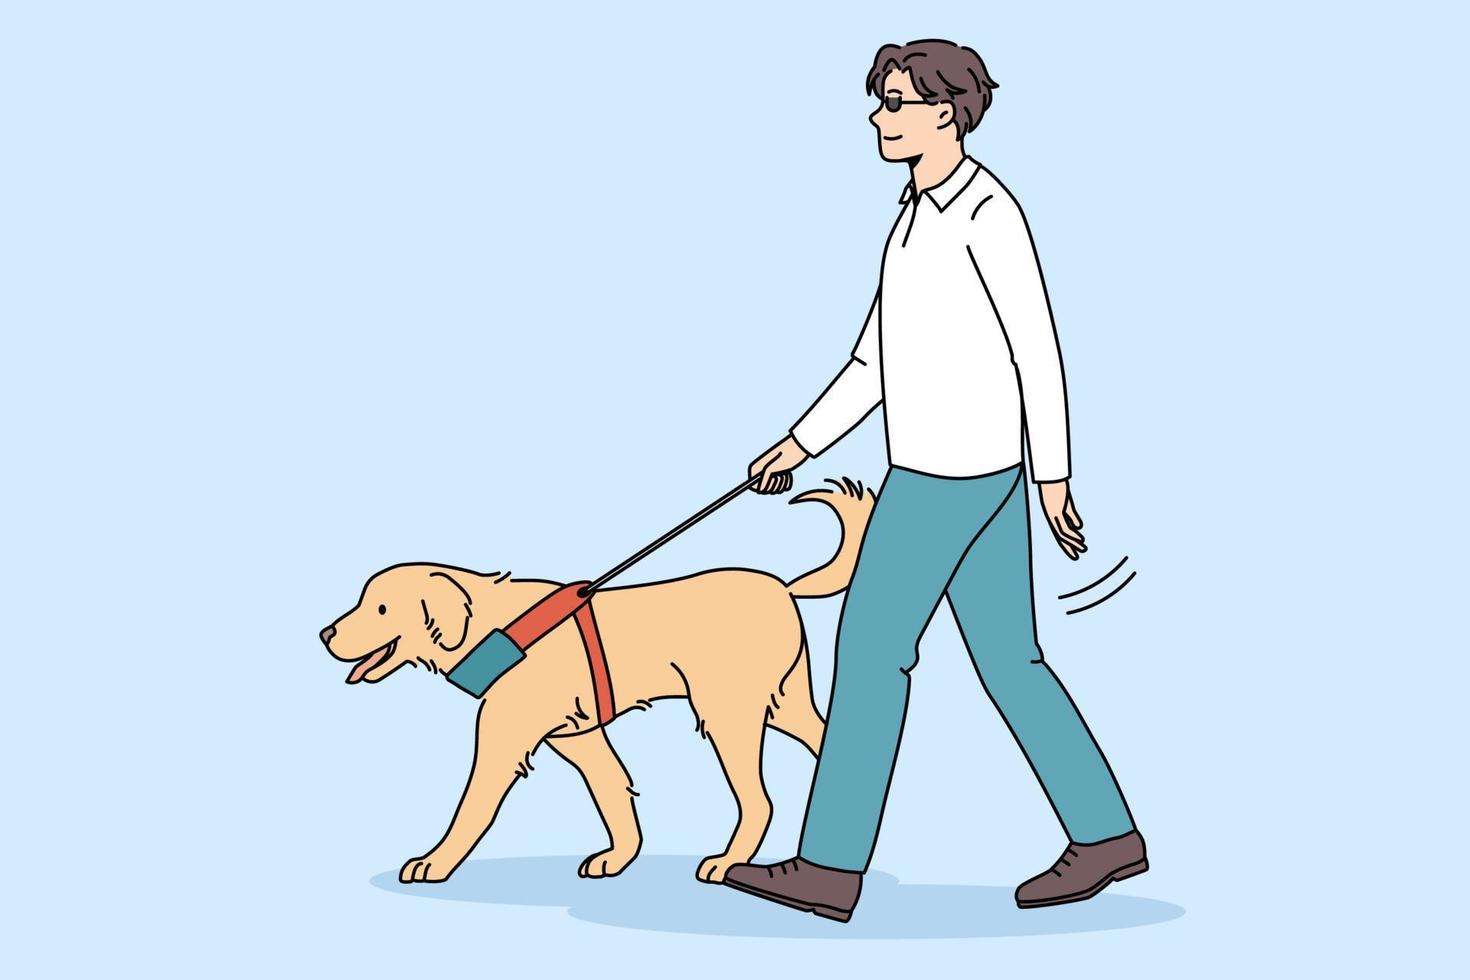 Blind man walk outdoor with guide dog assistance. Professional trained pet puppy help disabled impaired guy on streets. Visual impairment concept. Service animal and people. Vector illustration.